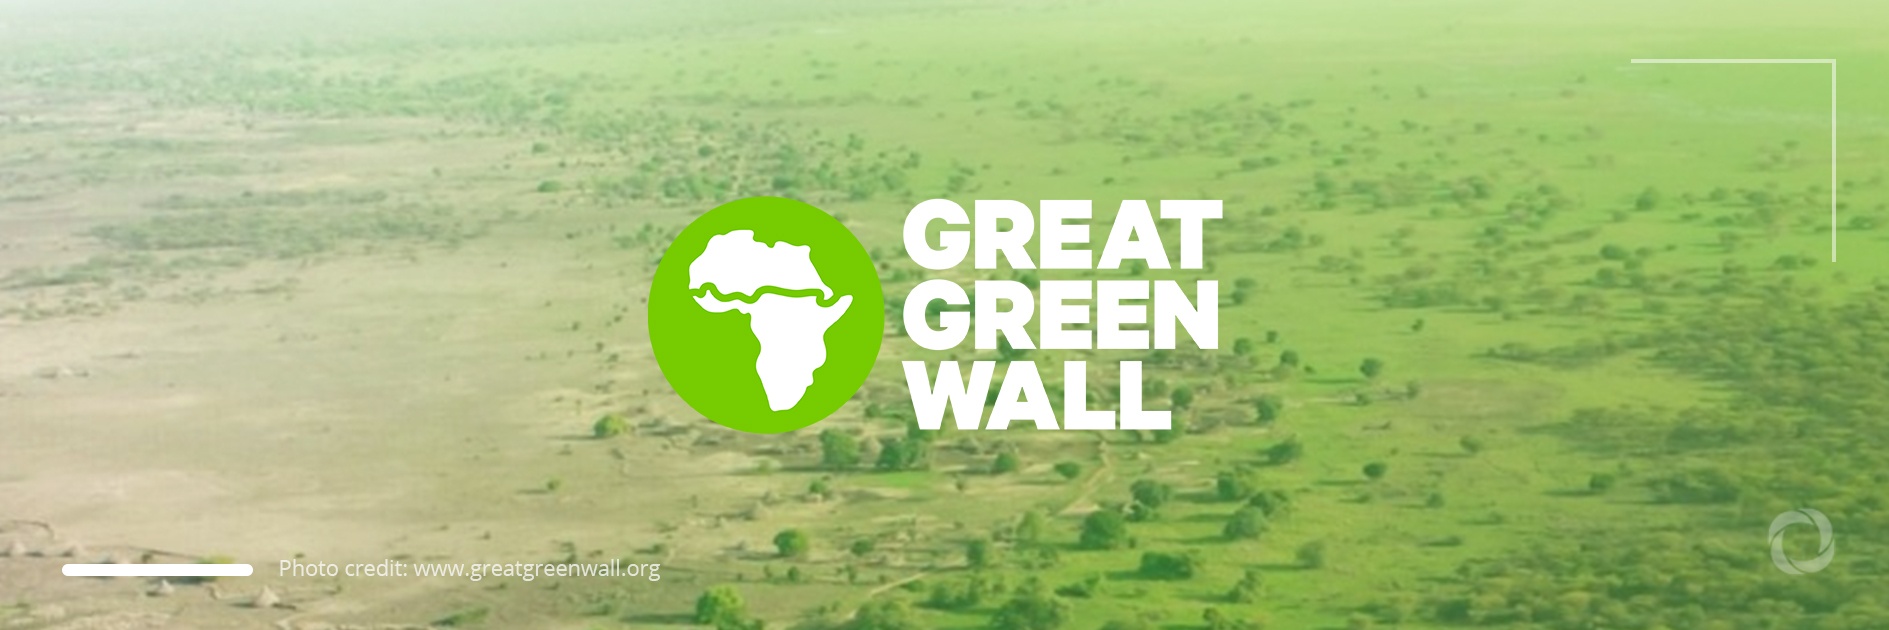 Great Green Wall – Africa's remedy for climate change?